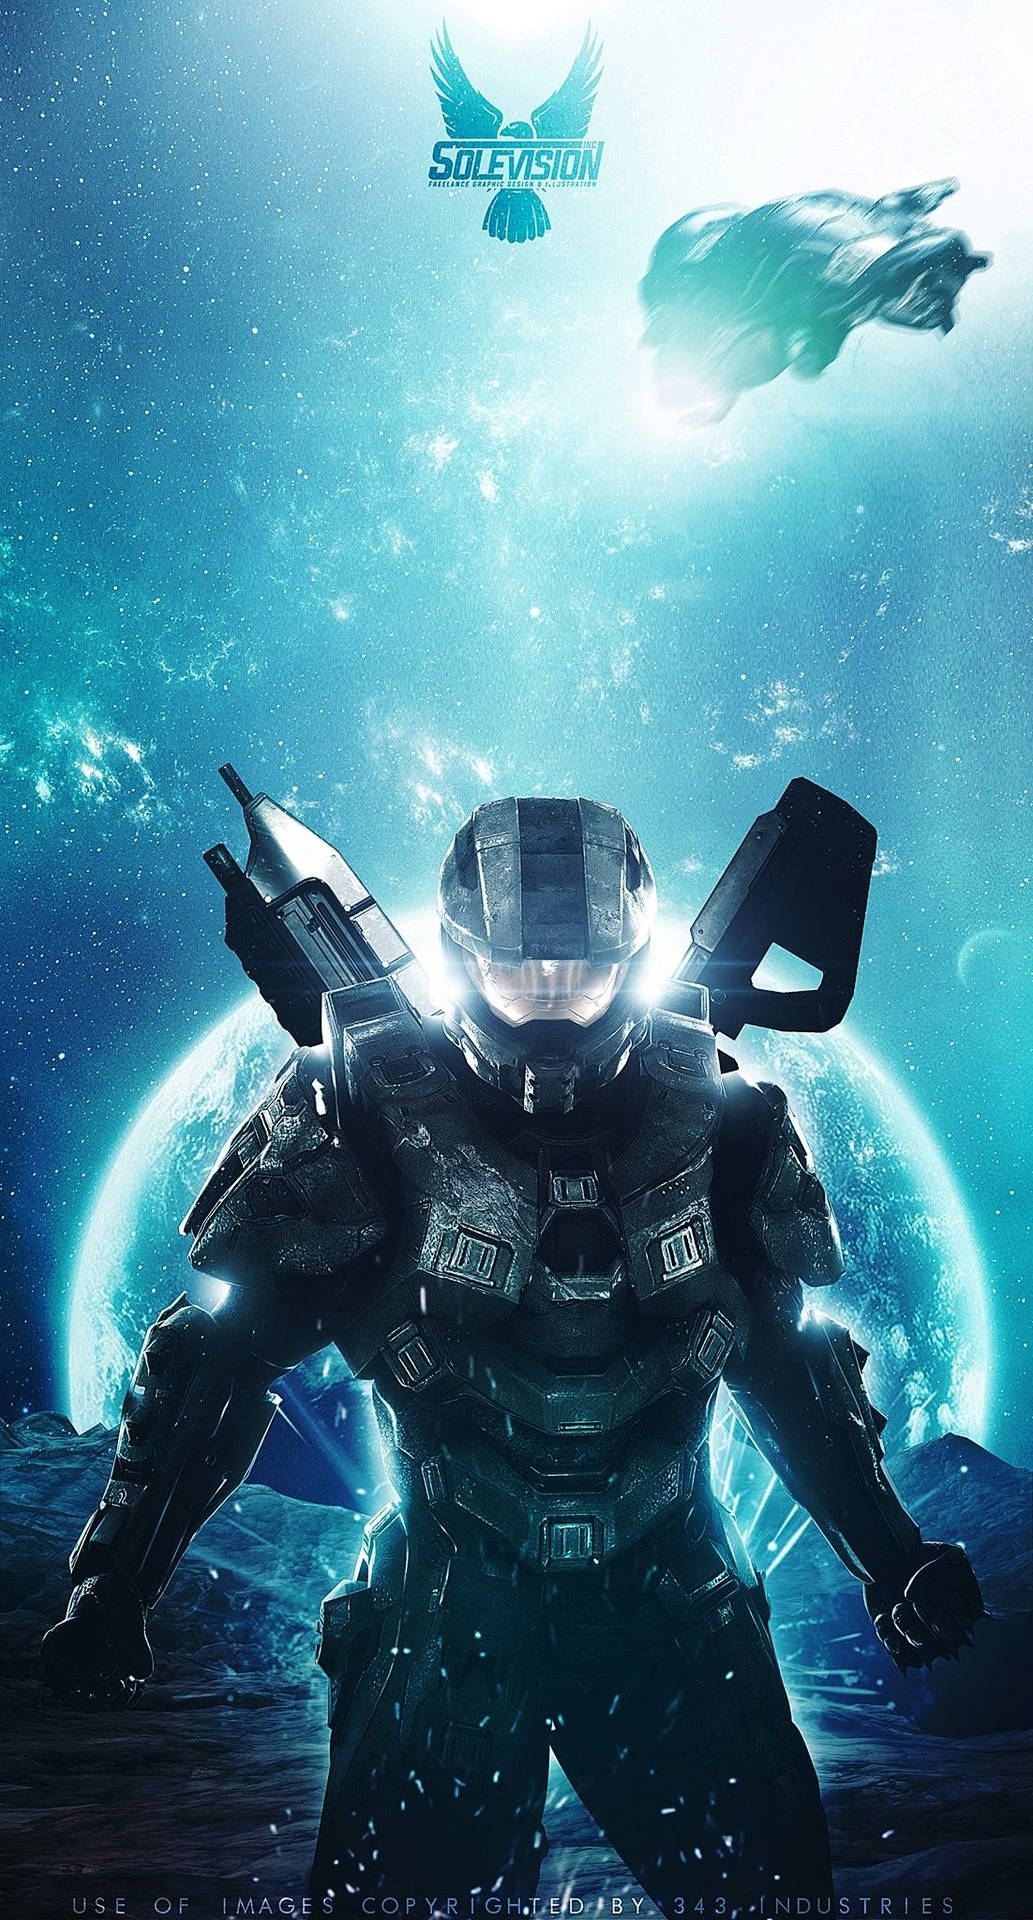 Halo phone wallpapers Group 43